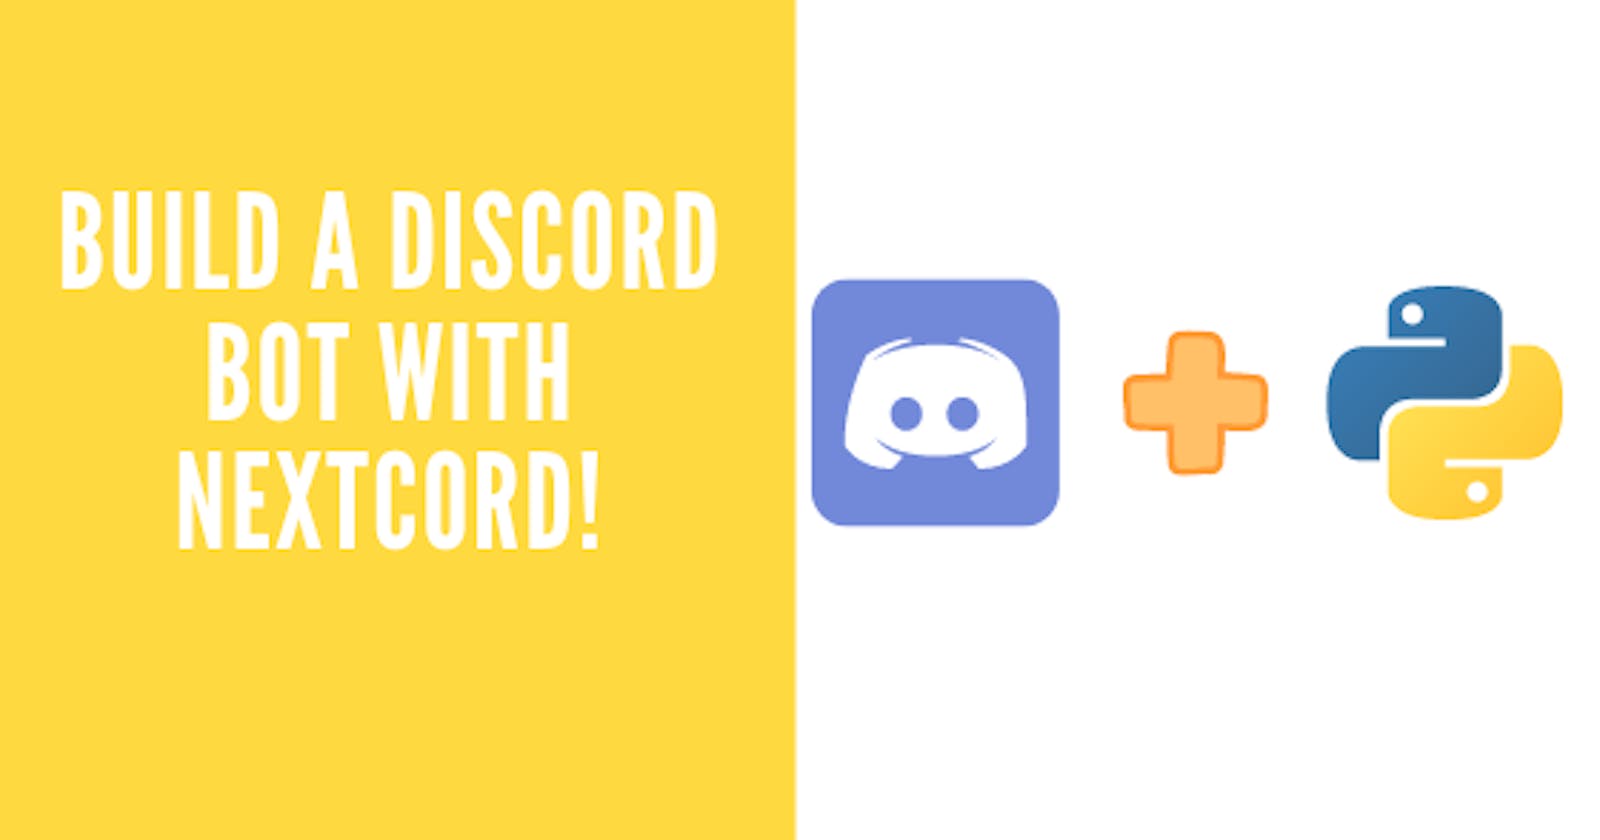 How to create a Discord Bot using nextcord in Python